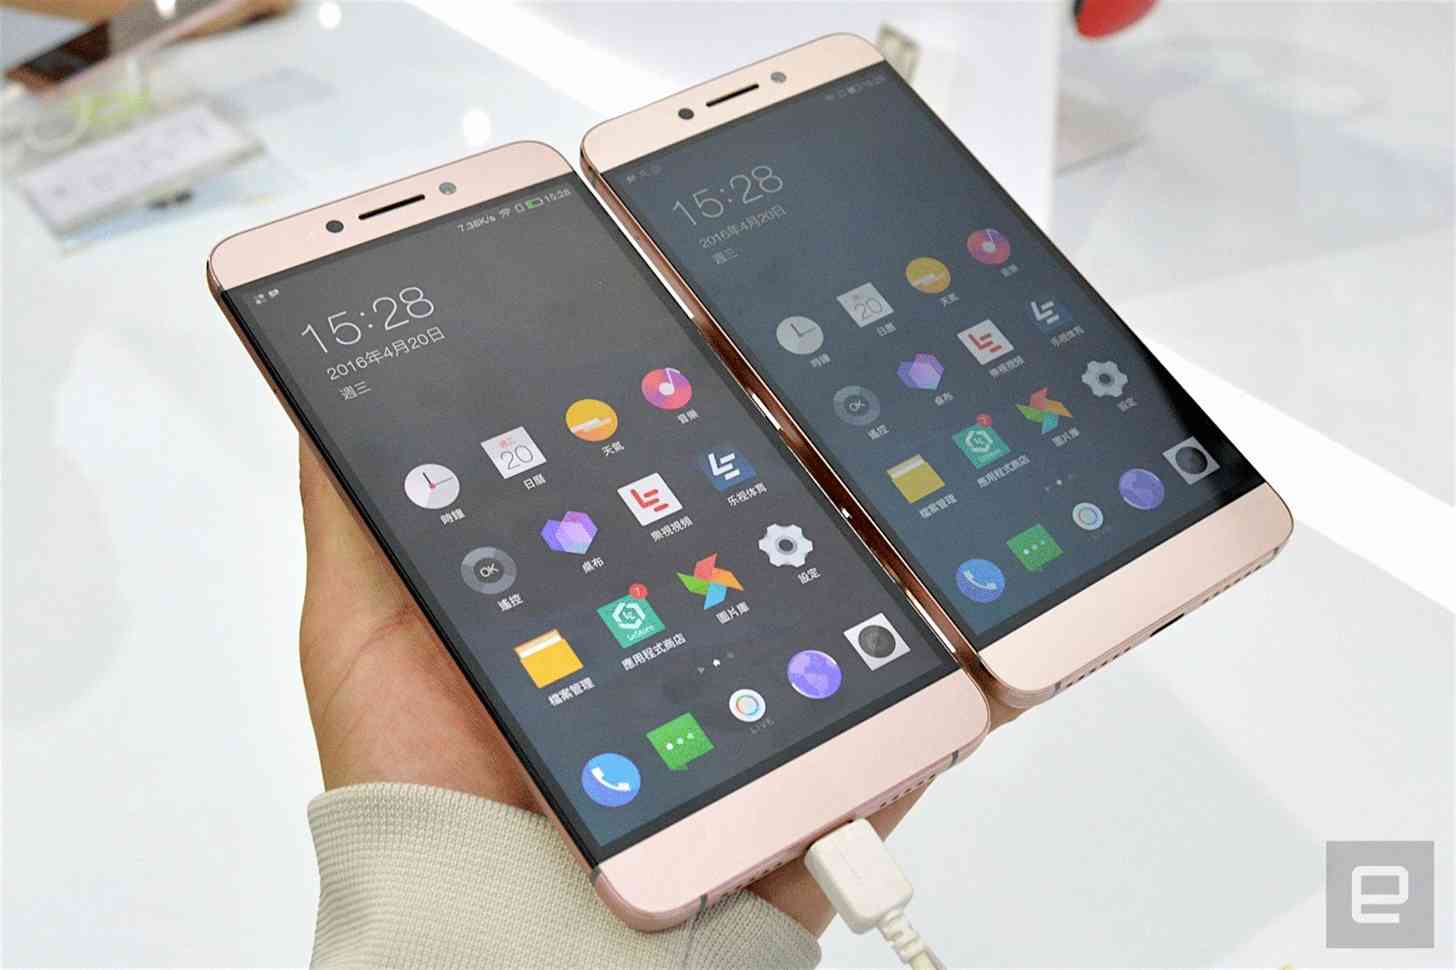 LeEco Le Max 2 official